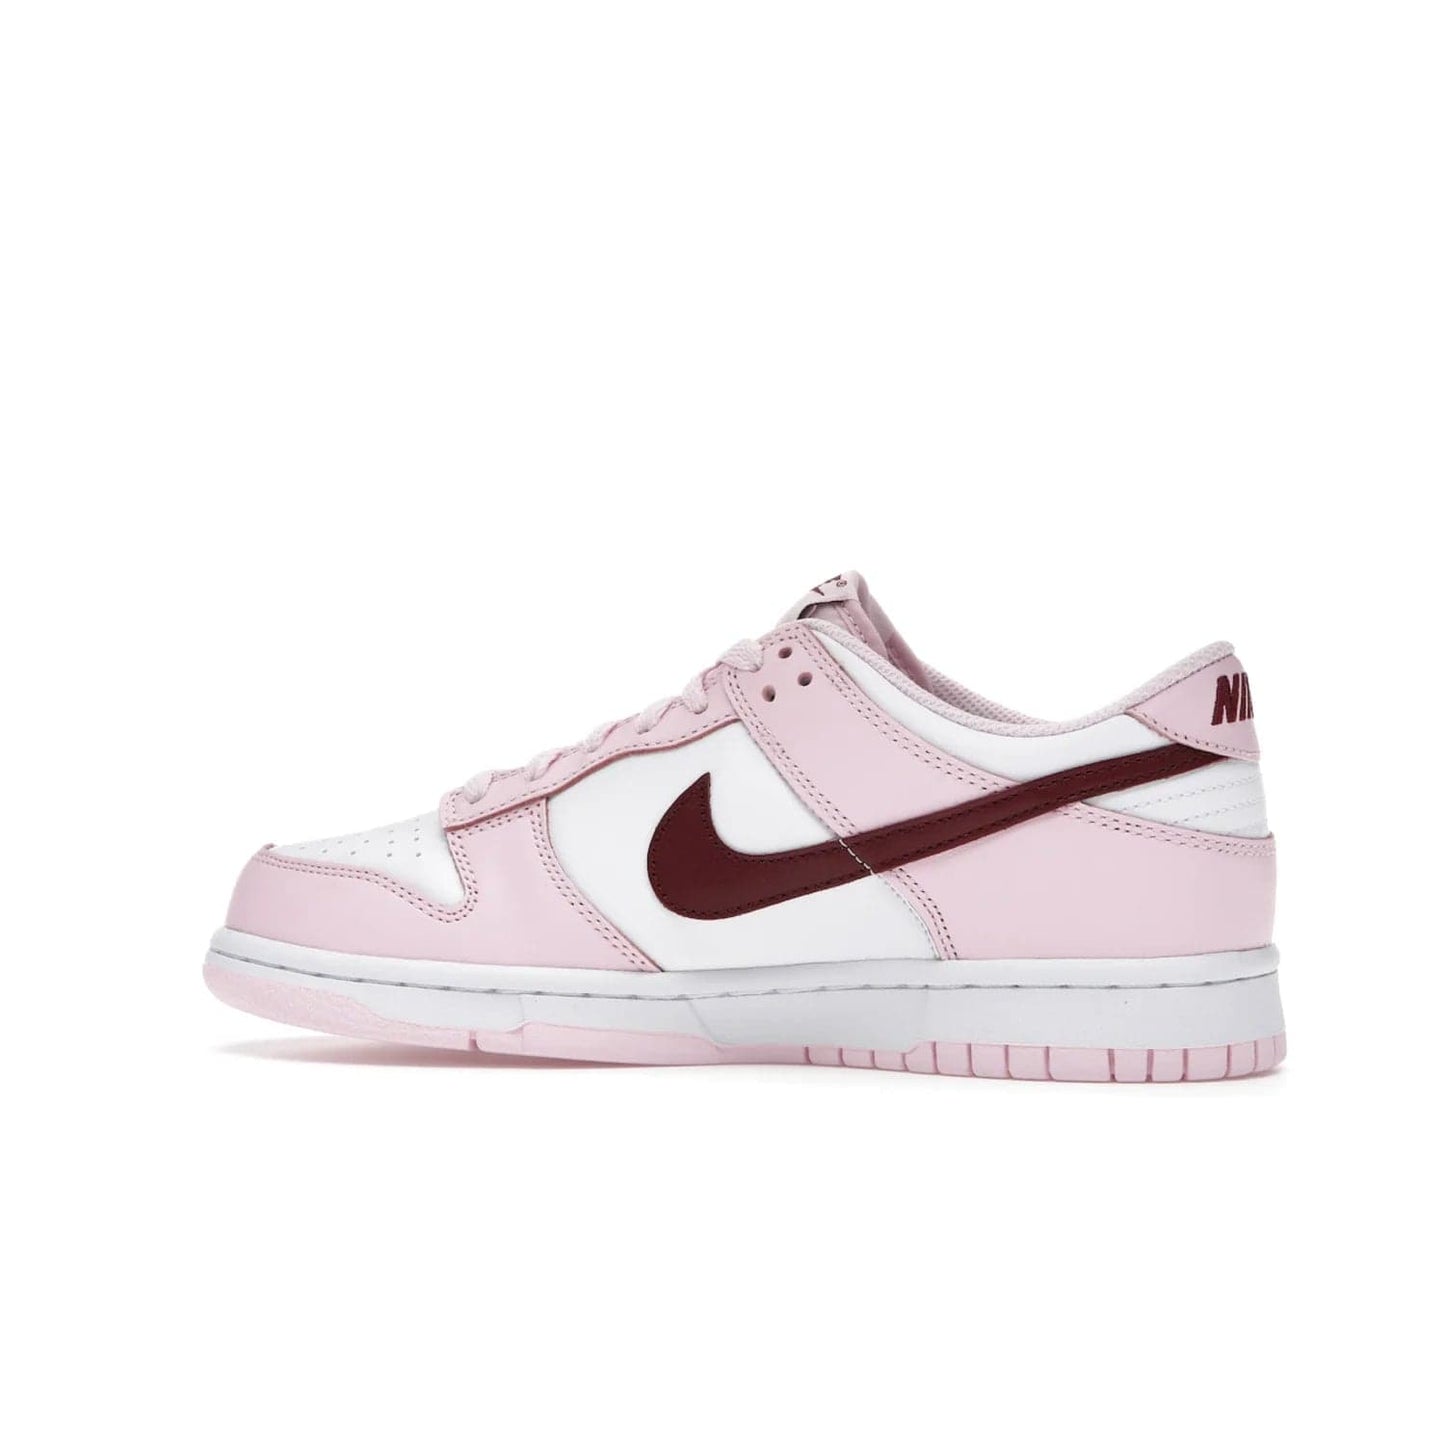 Nike Dunk Low Pink Foam Red White (GS) - Image 21 - Only at www.BallersClubKickz.com - #
Introducing the daring and stylish Nike Dunk Low Pink Foam Red White (GS) sneaker for grade schoolers. White leather with pink overlays and Dark Beetroot accents, classic Nike Dunk midsole and pink outsole. Released August 2021 for $85.